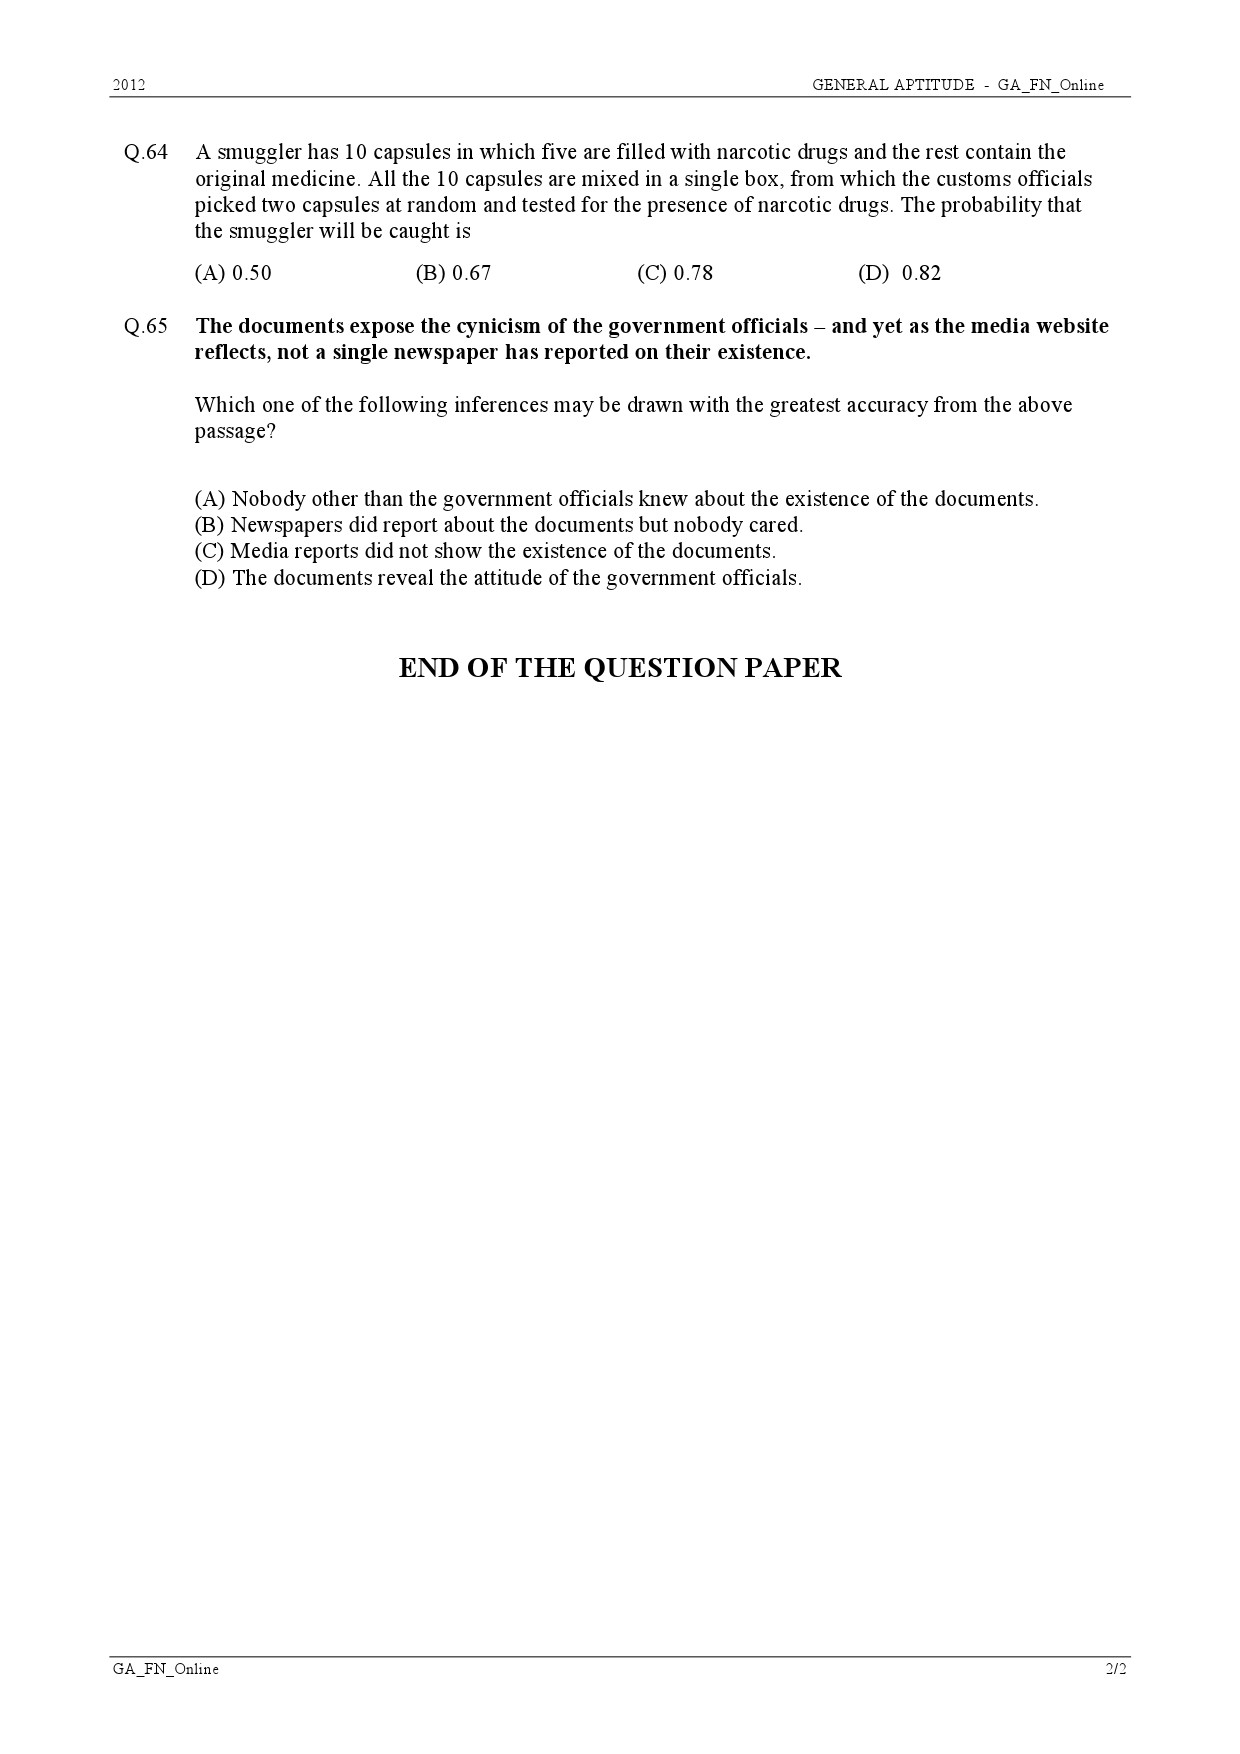 GATE Exam Question Paper 2012 Architecture and Planning 11